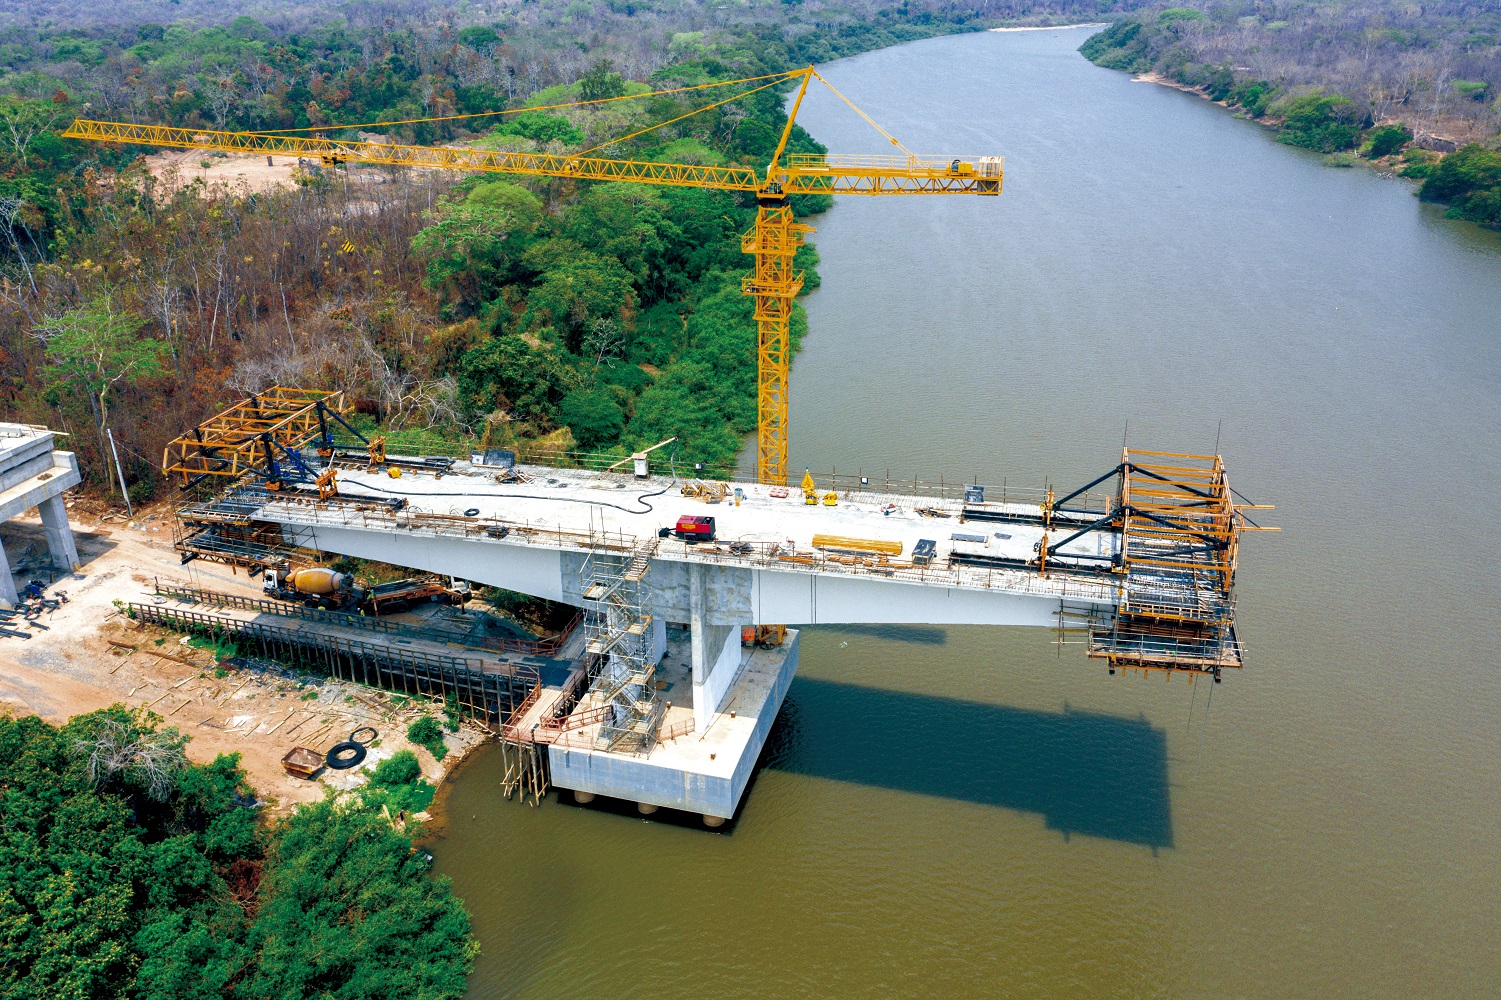 ULMA on the Cuiabá River in Brazil <br> Image source: Anmopyc